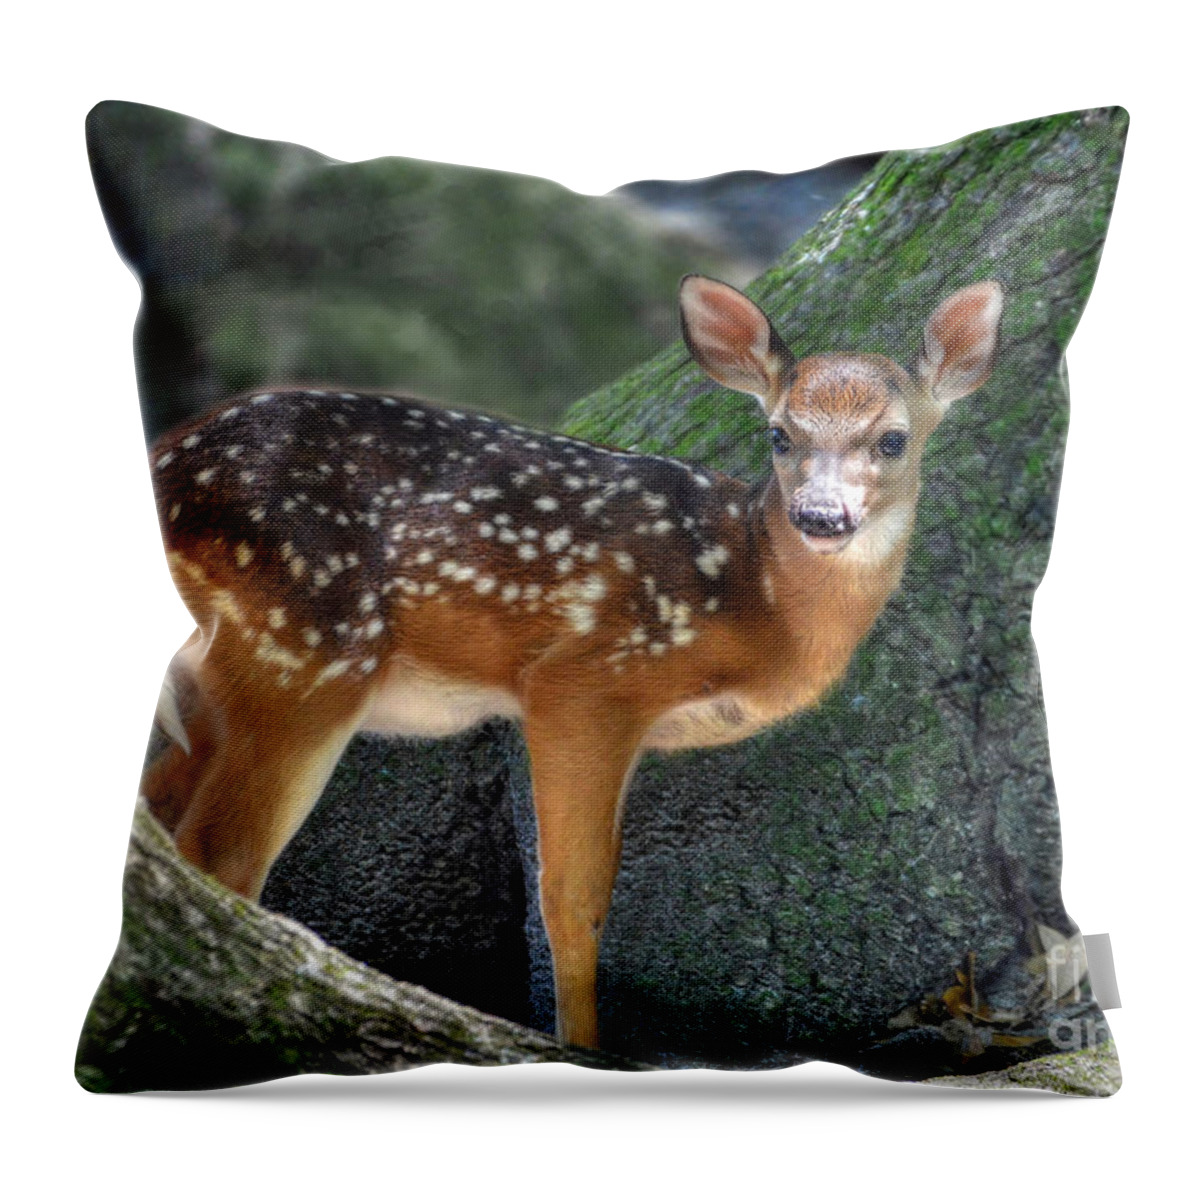 Deer Throw Pillow featuring the photograph Such A Deer by Kathy Baccari